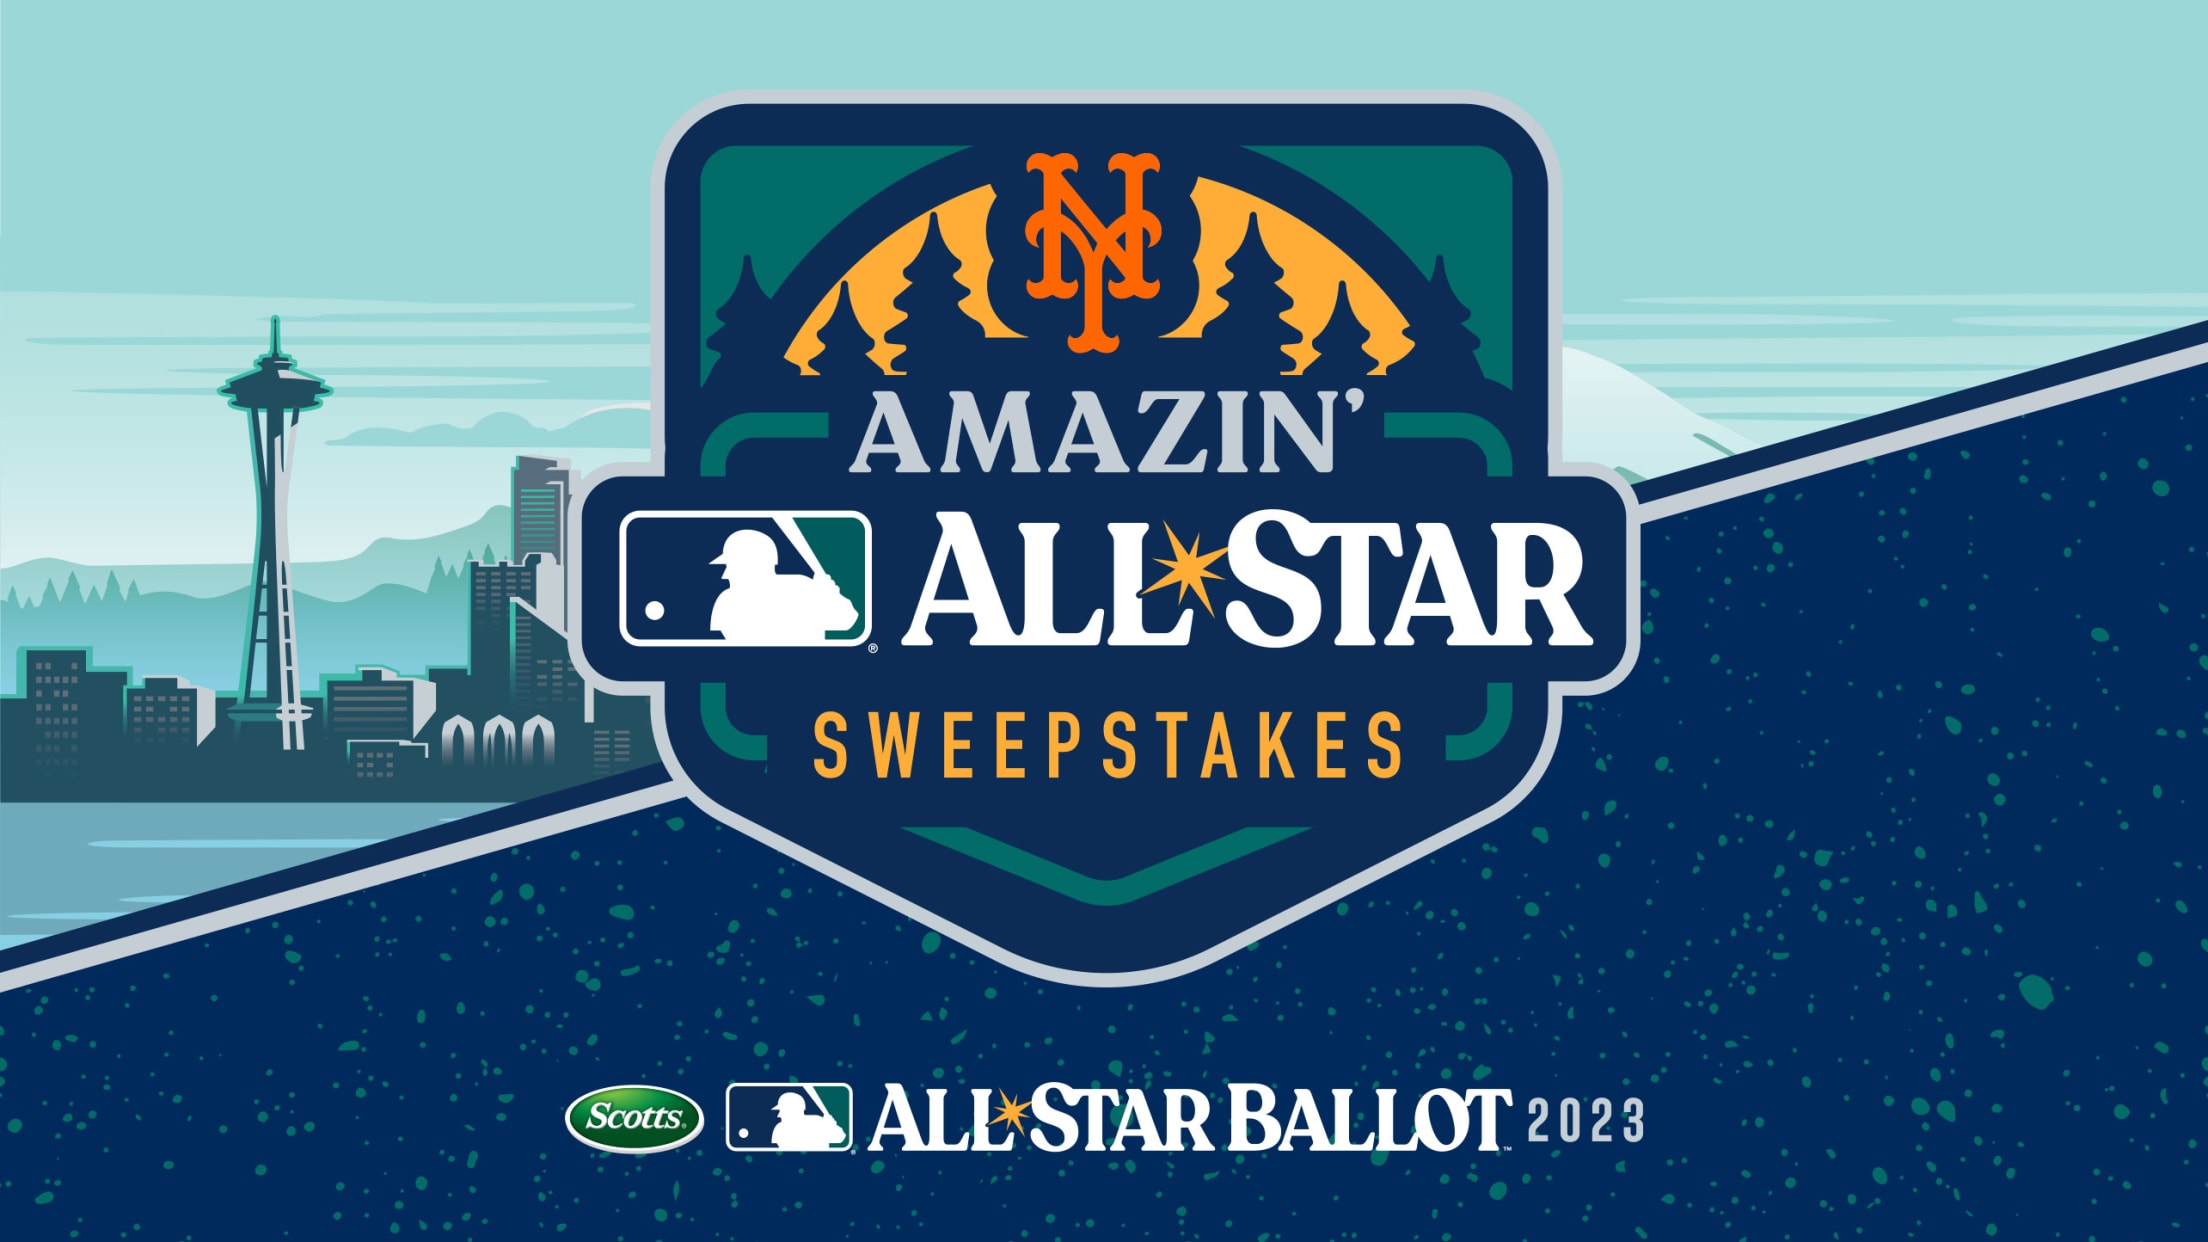 New York Mets - The 2022 All-Star Ballot is now OPEN!